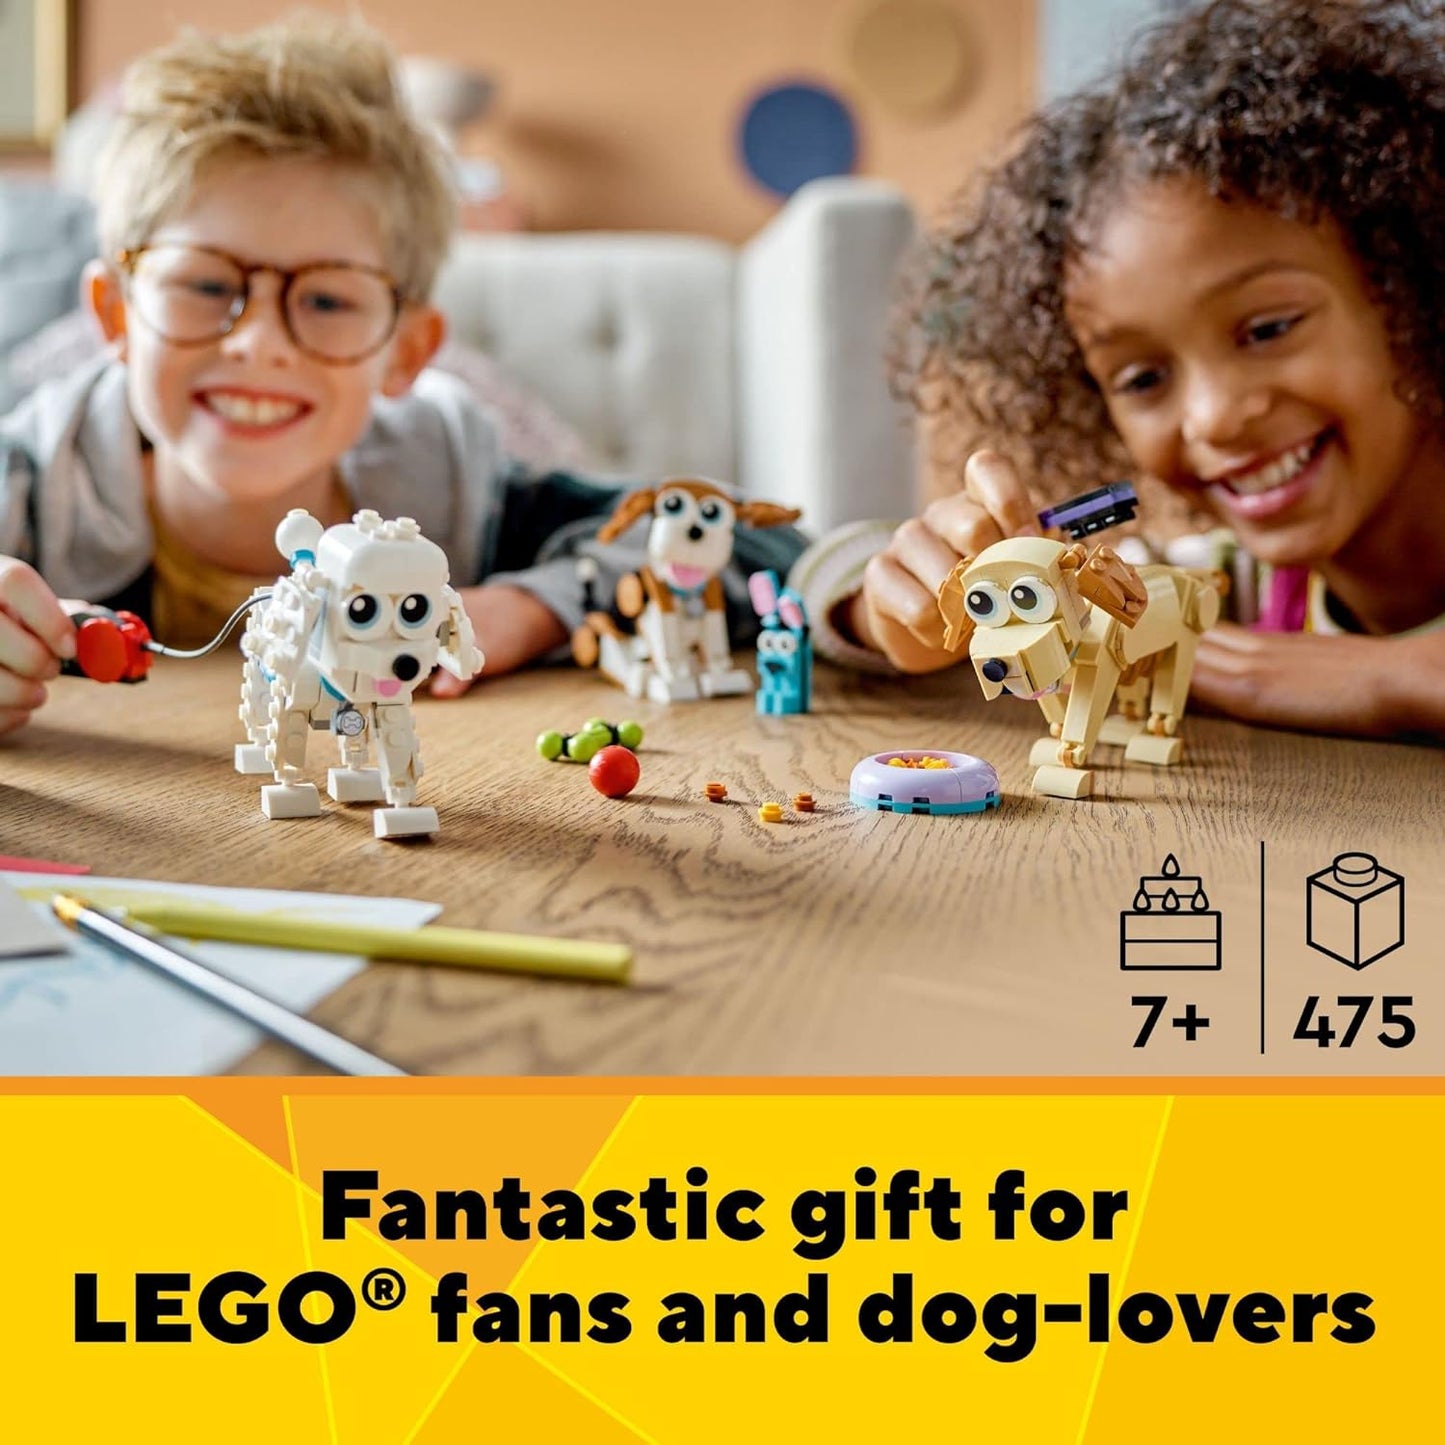 LEGO Creator - 3 in 1 Adorable Dogs Building  31137